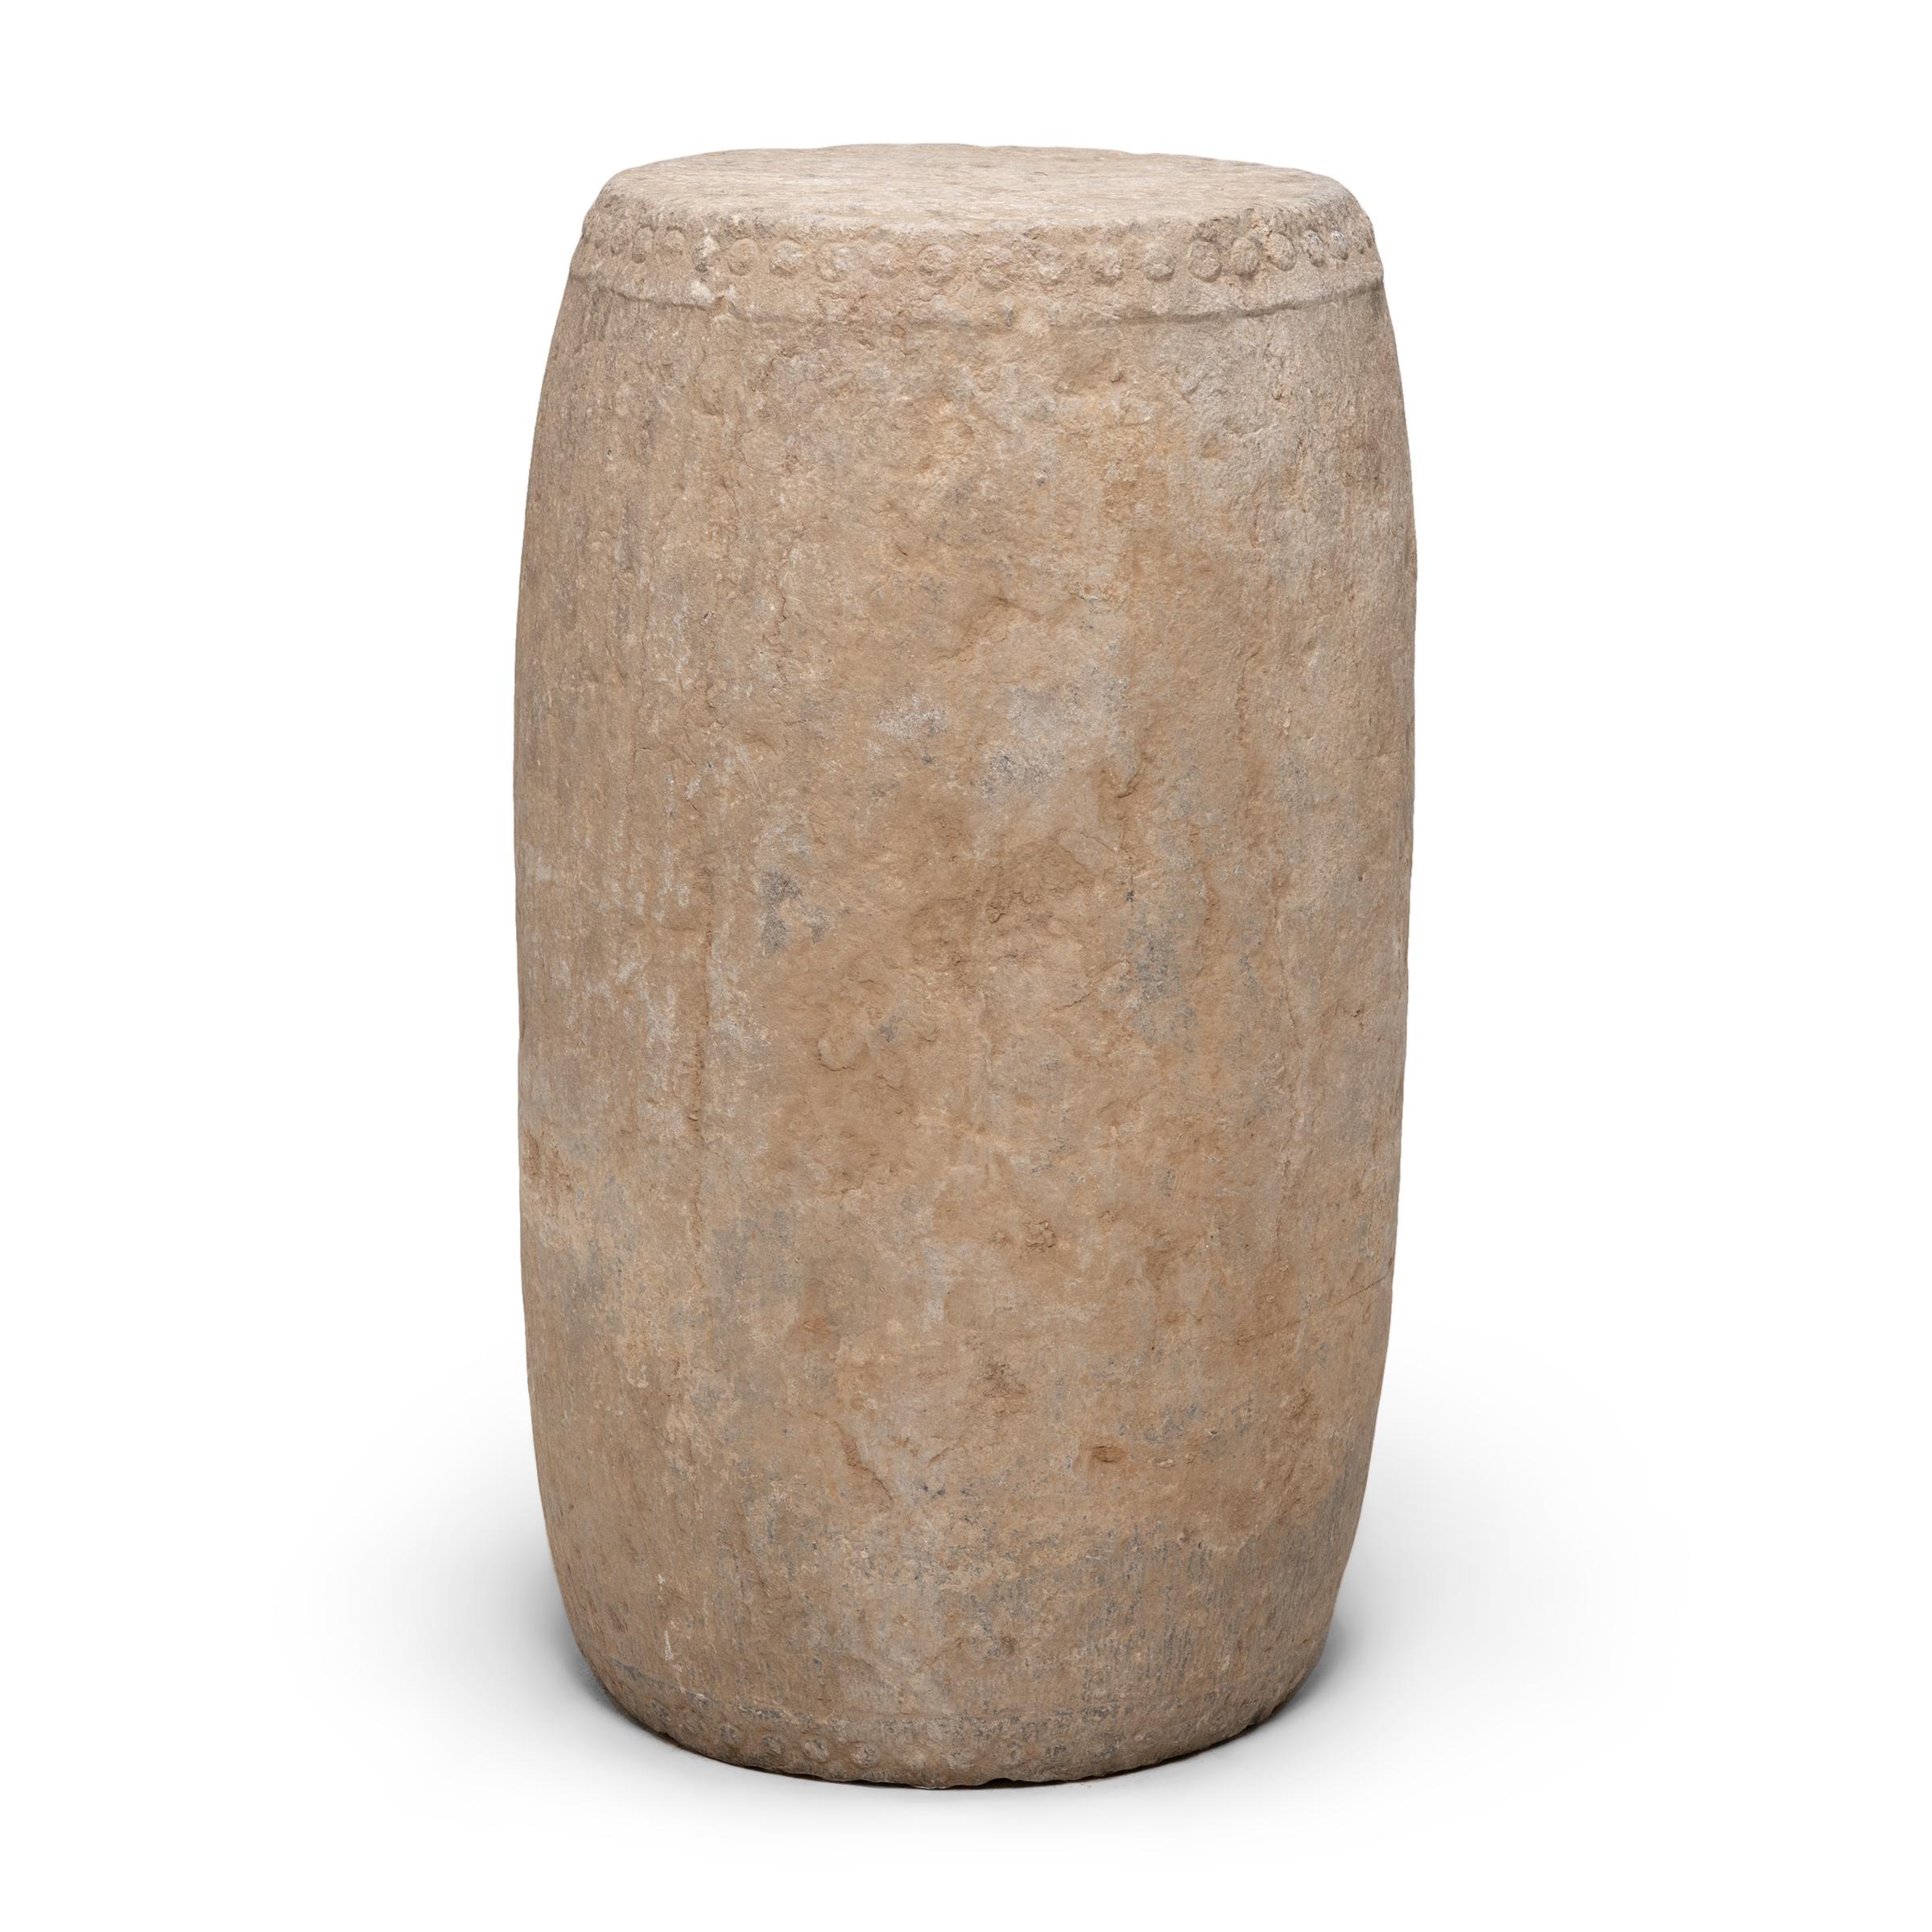 This monumental drum stool was hand-carved from solid limestone by artisans in Shanxi province over two centuries ago. Drum-form stools such as this were traditionally used in gardens and outdoor pavilions where upper class scholars read, wrote,